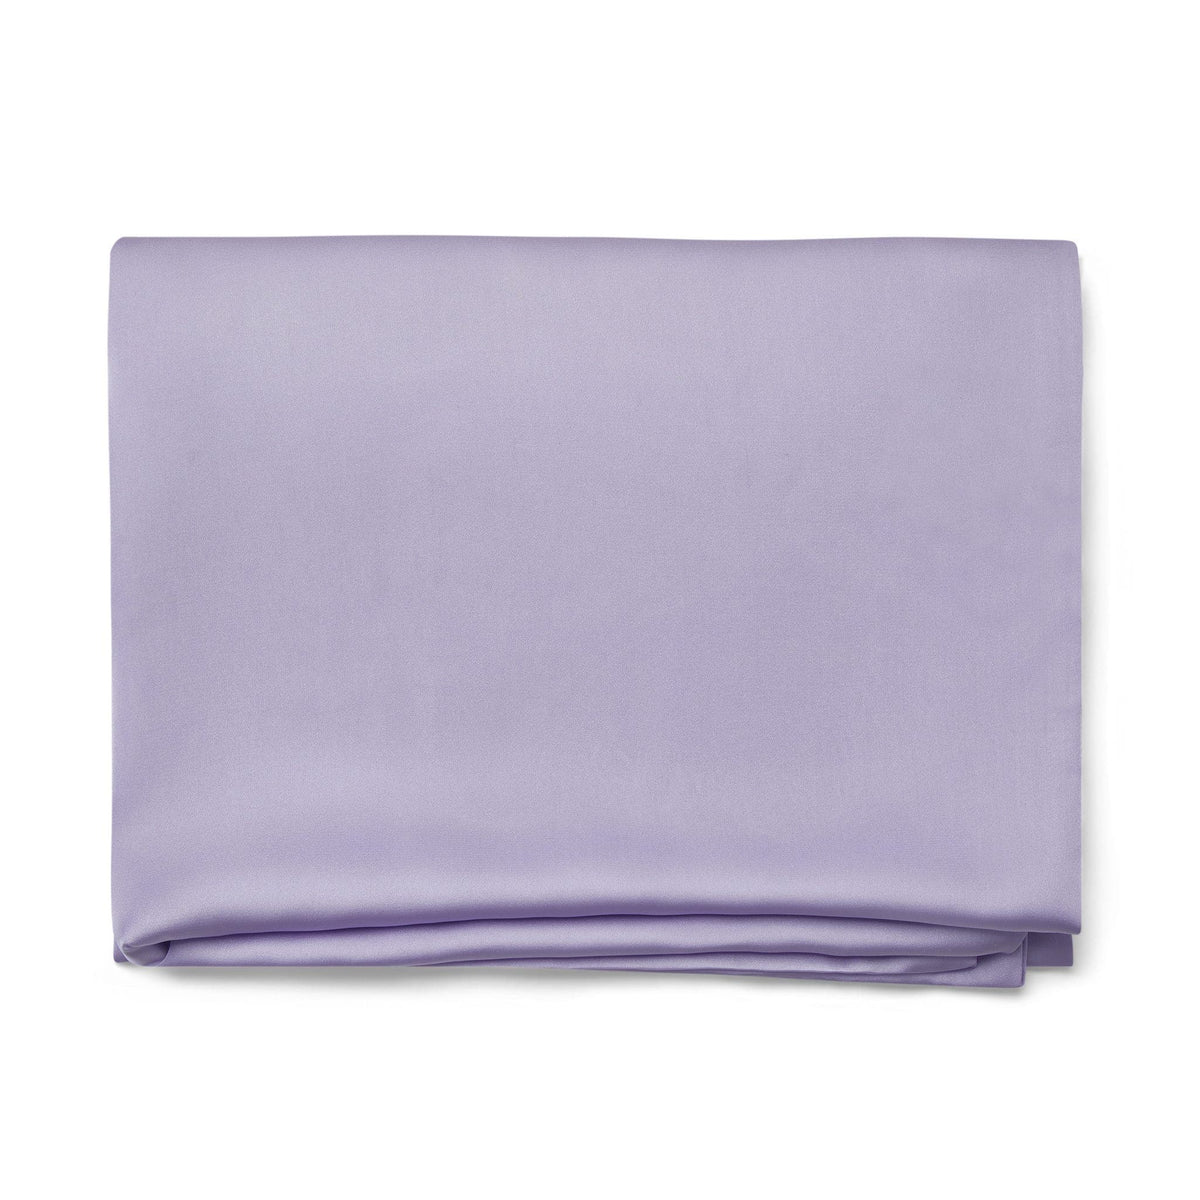 Only Curls Satin Pillowcase - Lilac - Only Curls